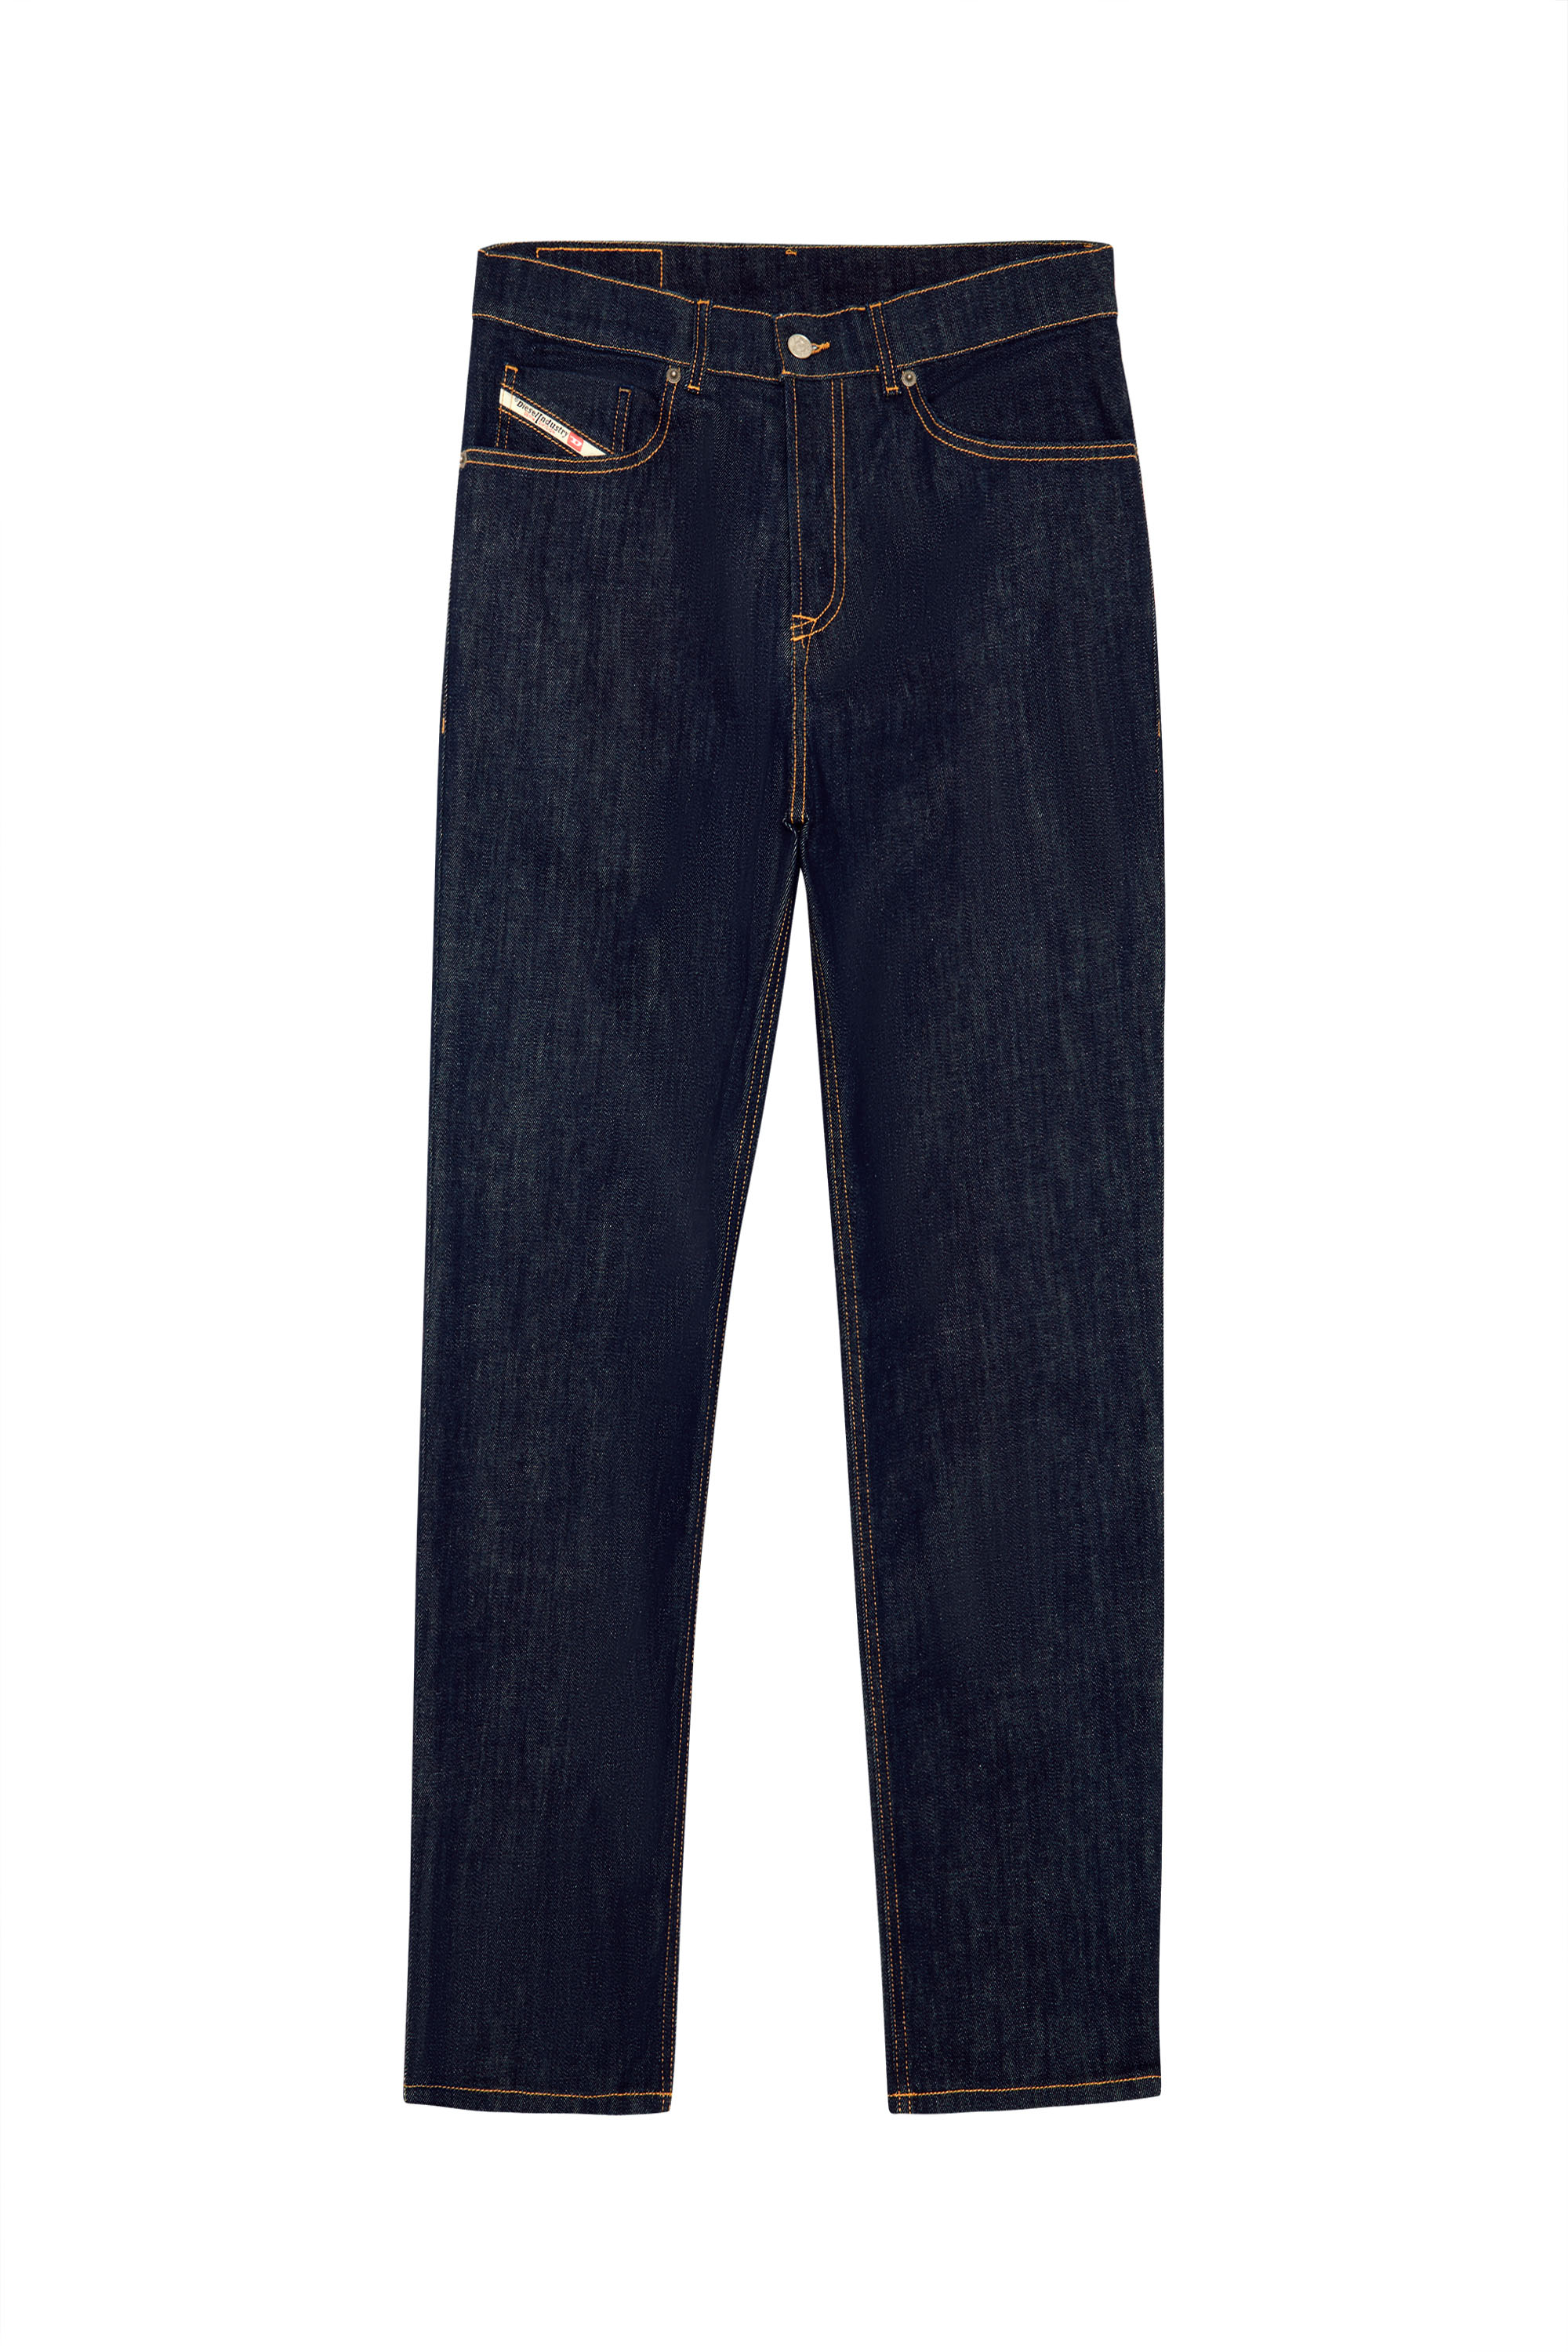 Tapered Jeans 2005 D-Fining Z9B89, Dark Blue - Jeans